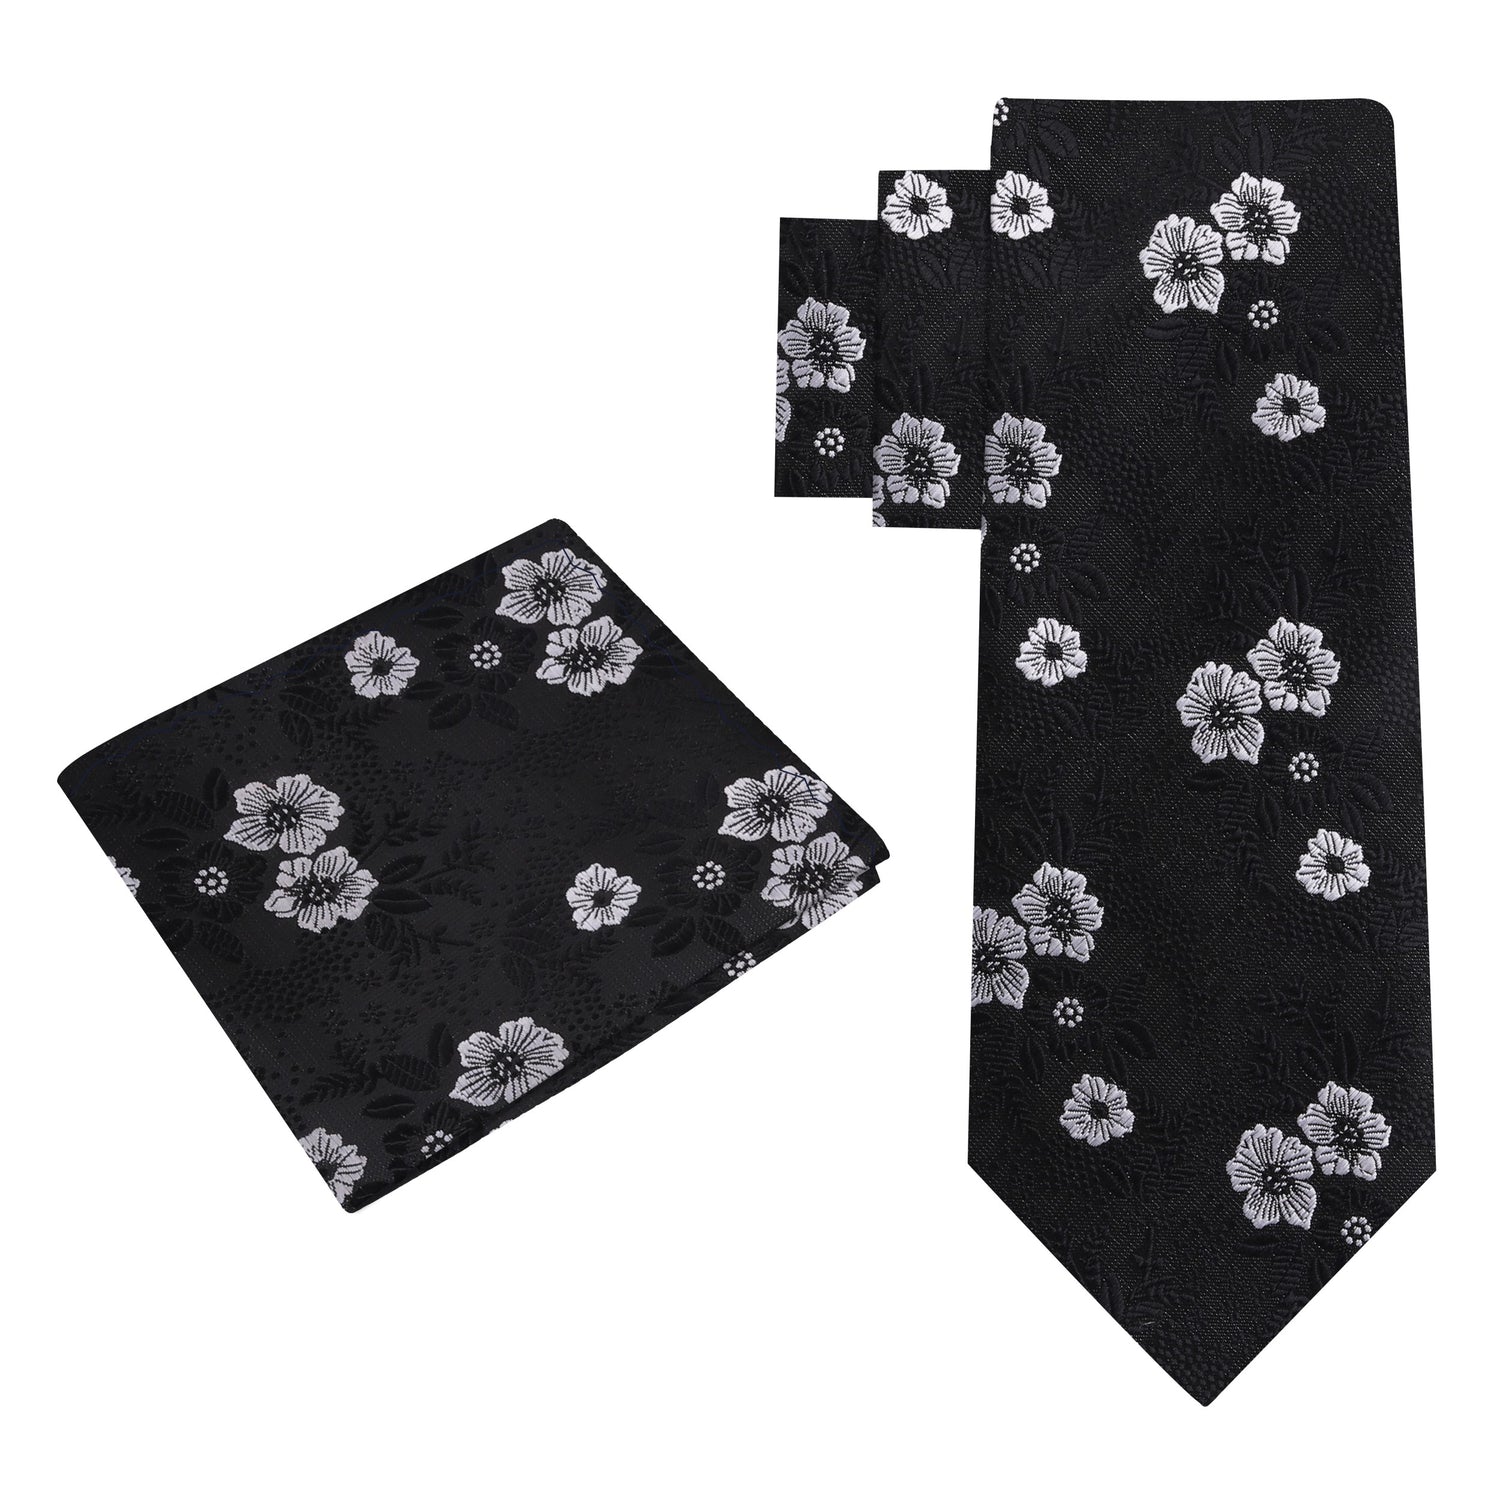 Alt View: Black, White Floral Tie and Pocket Square